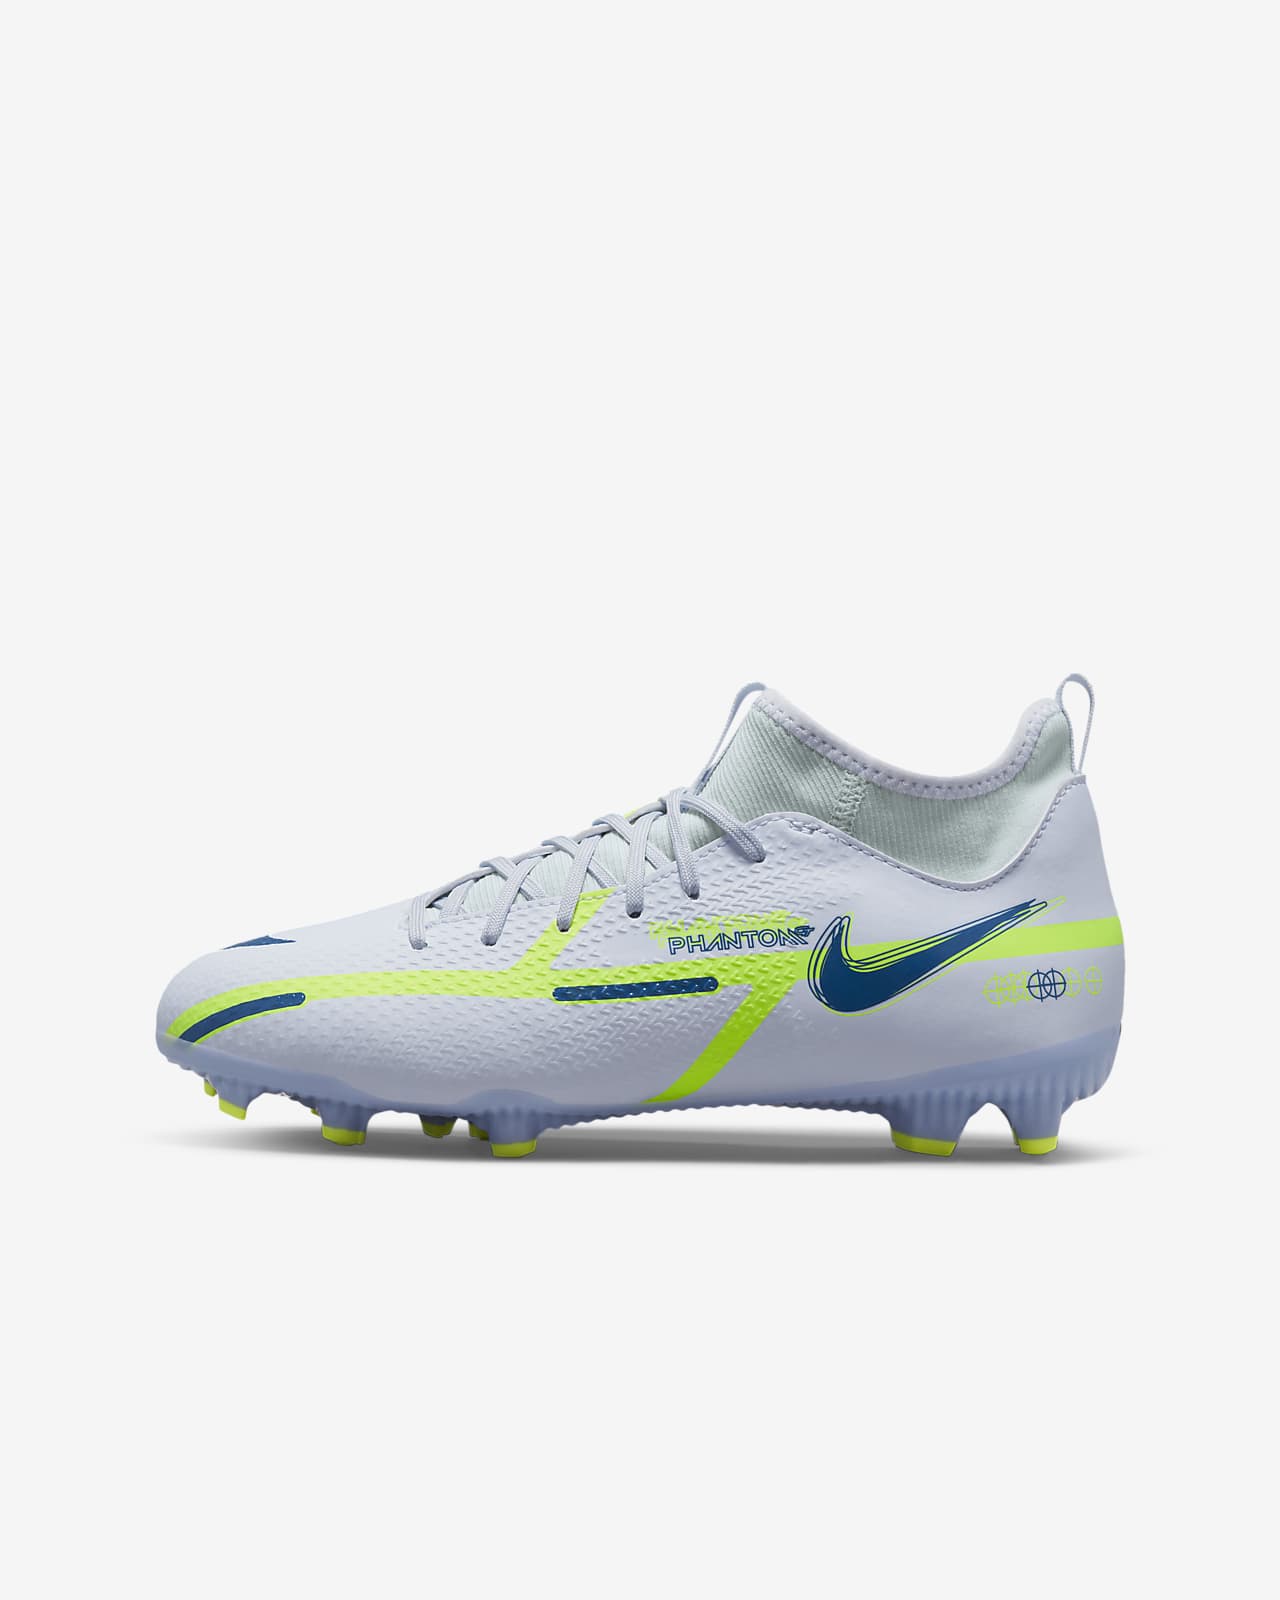 Nike Jr. Phantom GT2 Academy Dynamic Fit MG Younger/Older Kids' Multi-Ground Football Boots